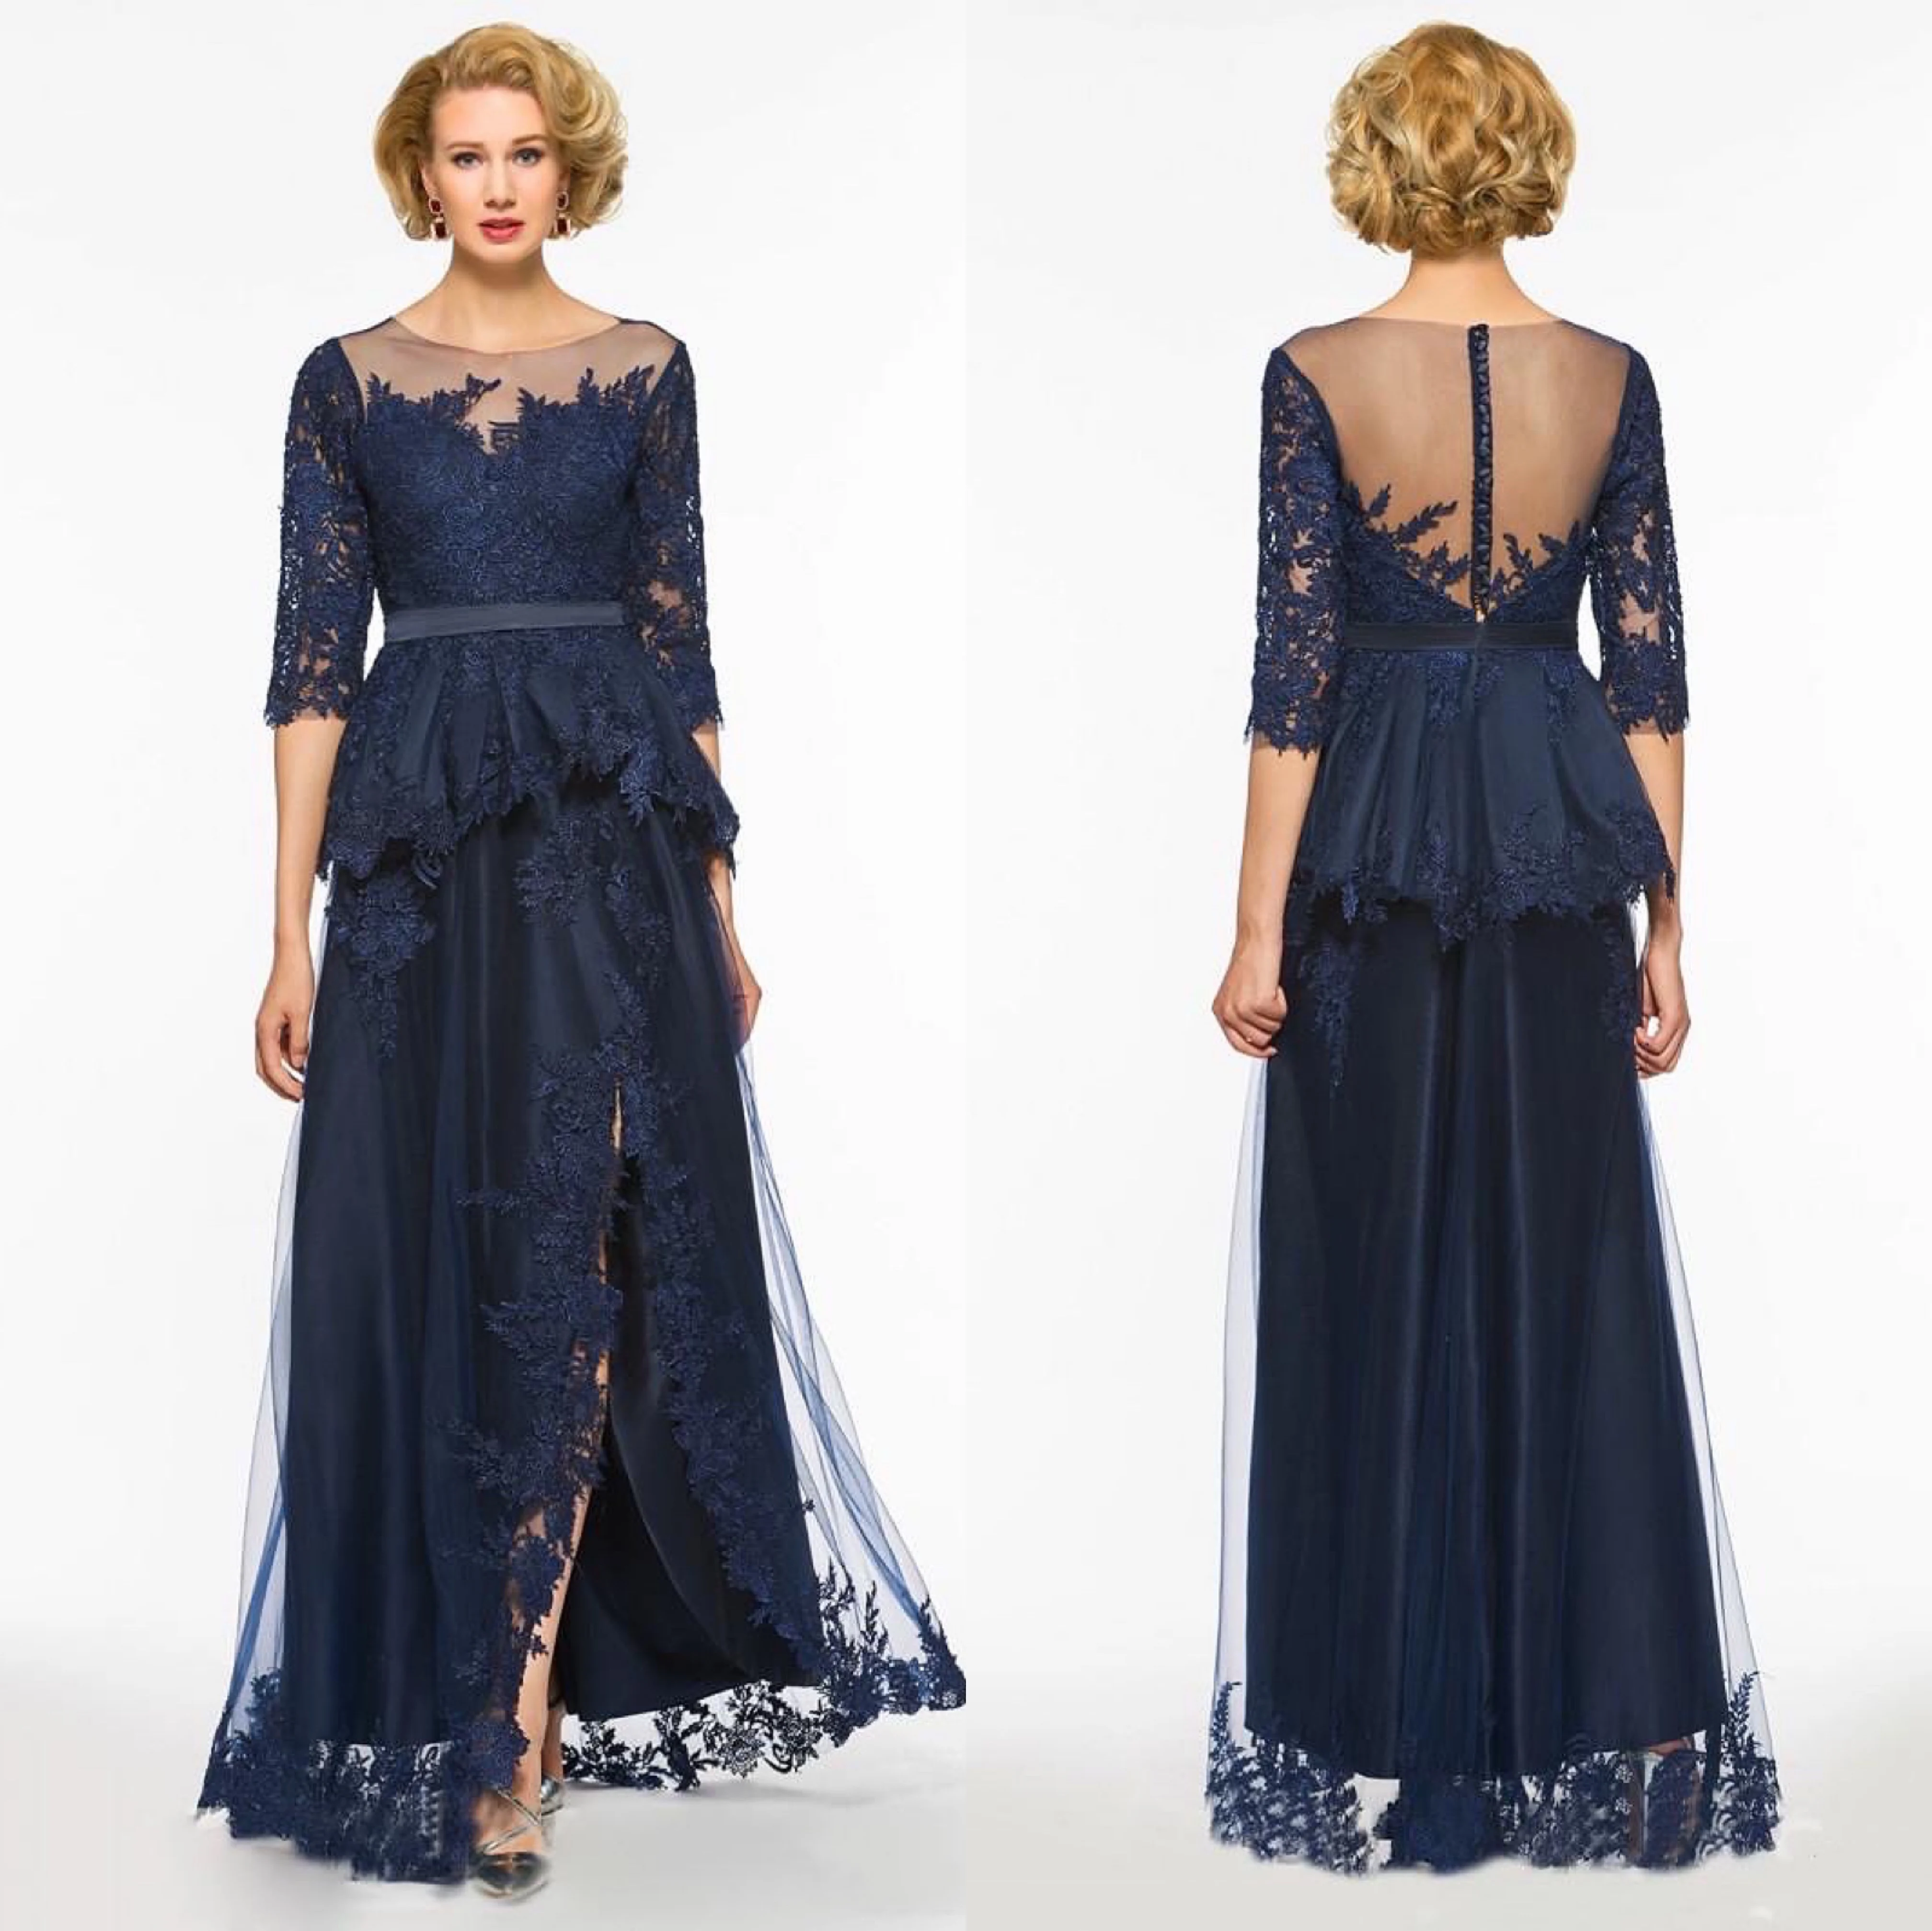 

Navy Blue Mother Of The Bridegroom Dress 3/4 Sleeves Appliques Lace Wedding Ceremony Evening Prom Party Mother Gowns Formal 2022